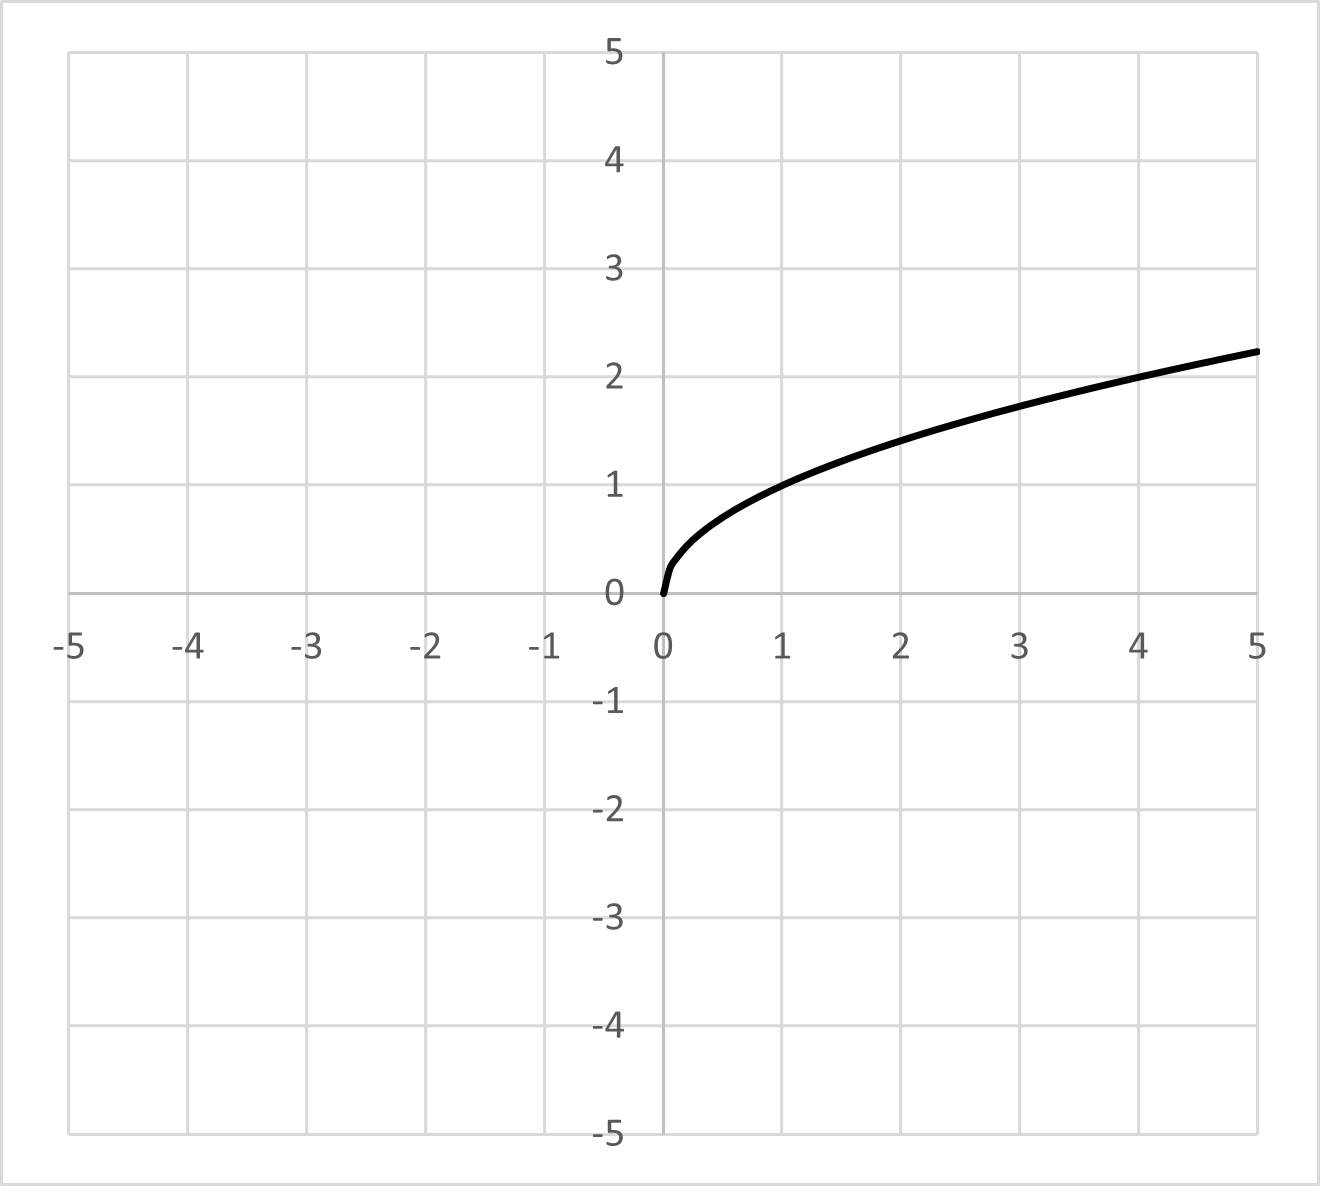 nonlinear function equation